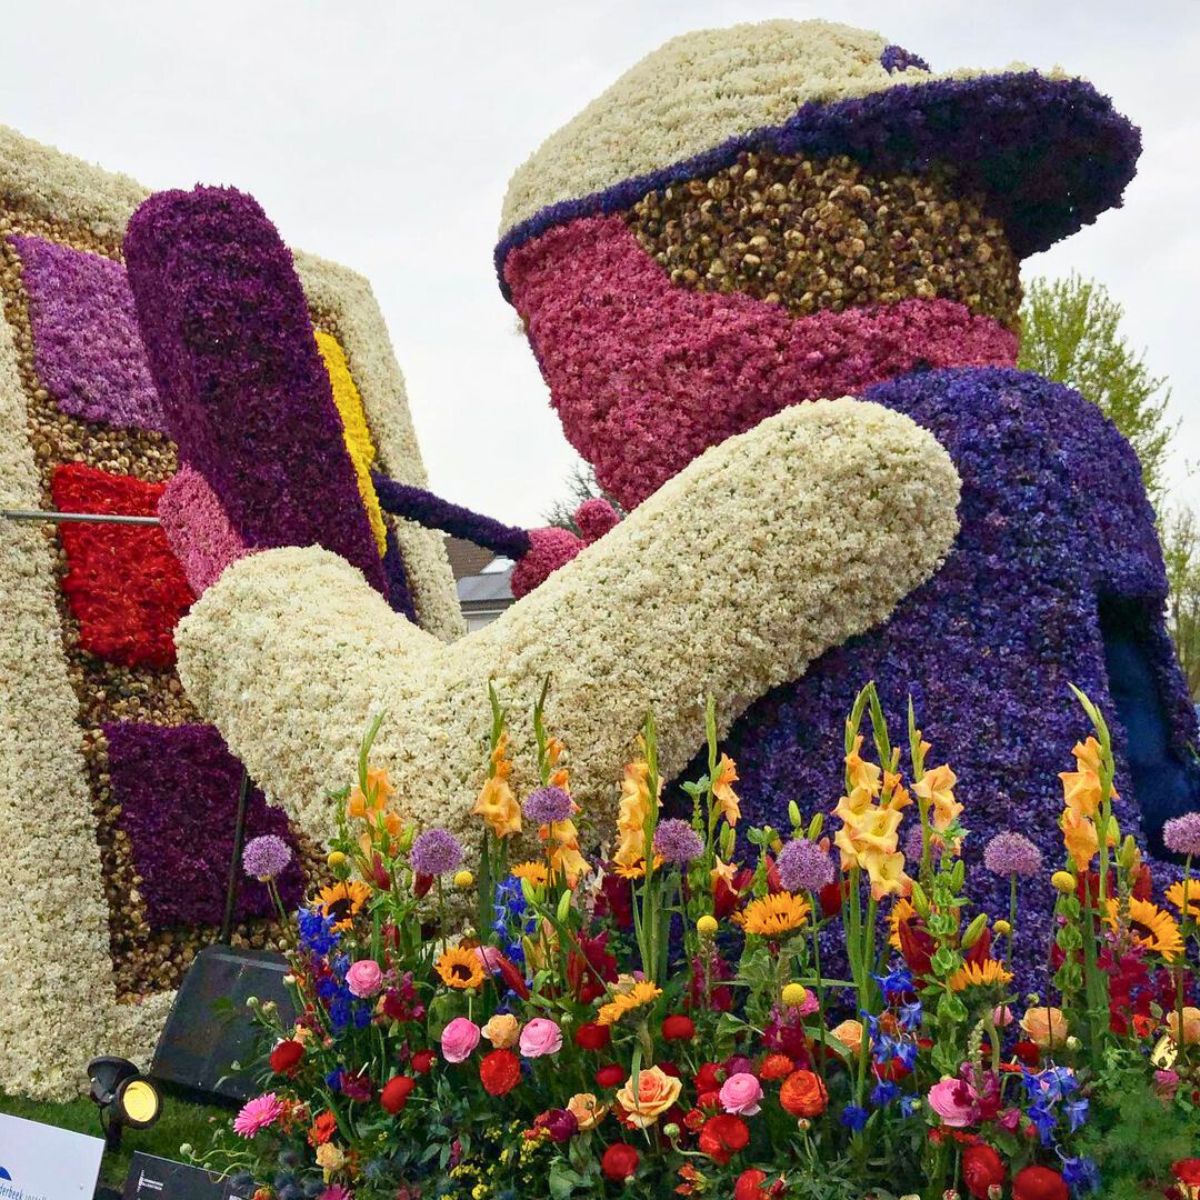 Man made out of flowers